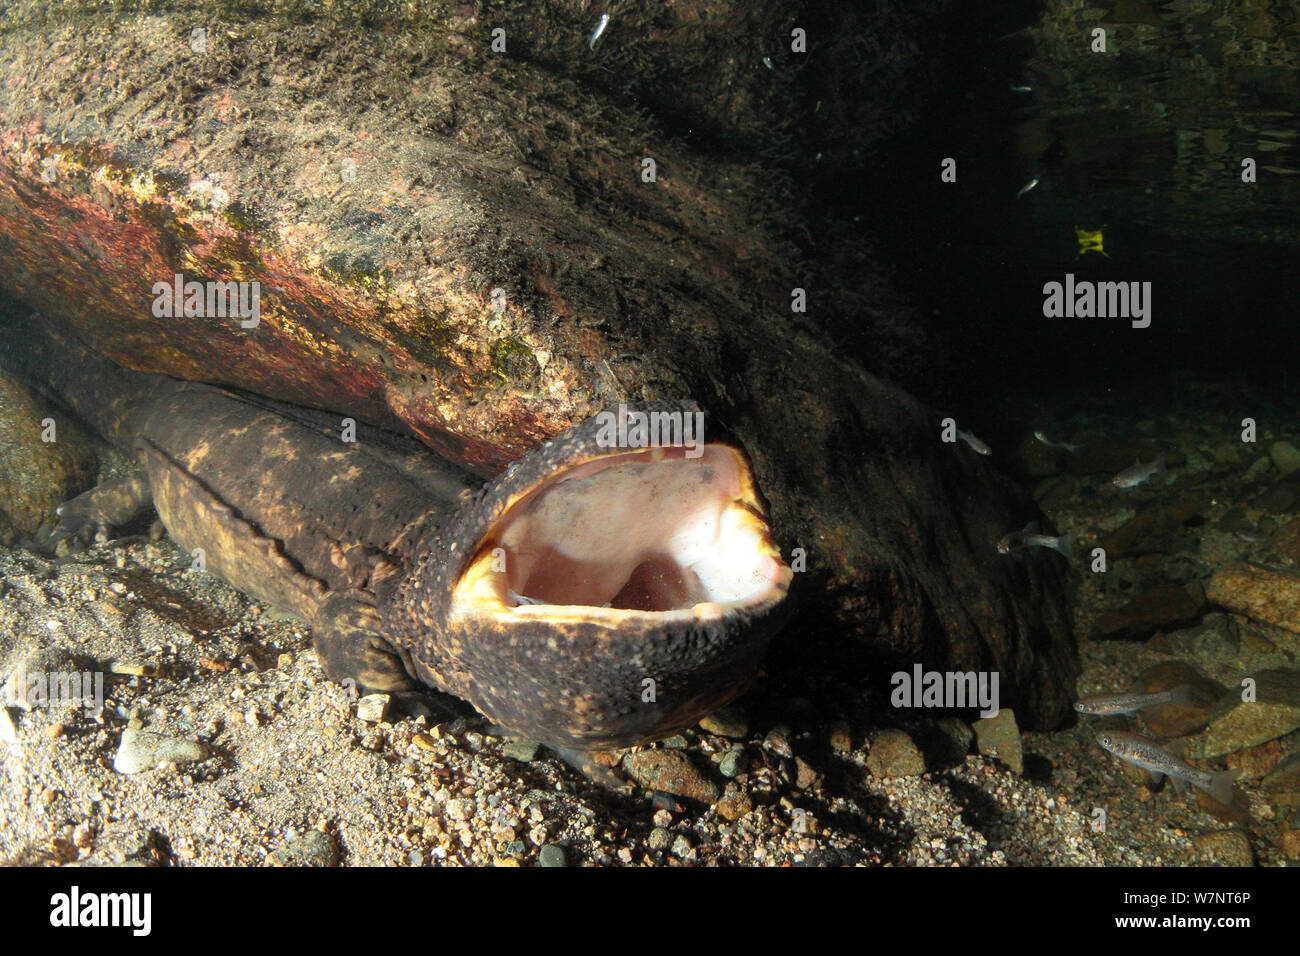 Japanese giant salamander (Andrias japonicus) moulting Hino River, Tottori, Japan, August. Stock Photo